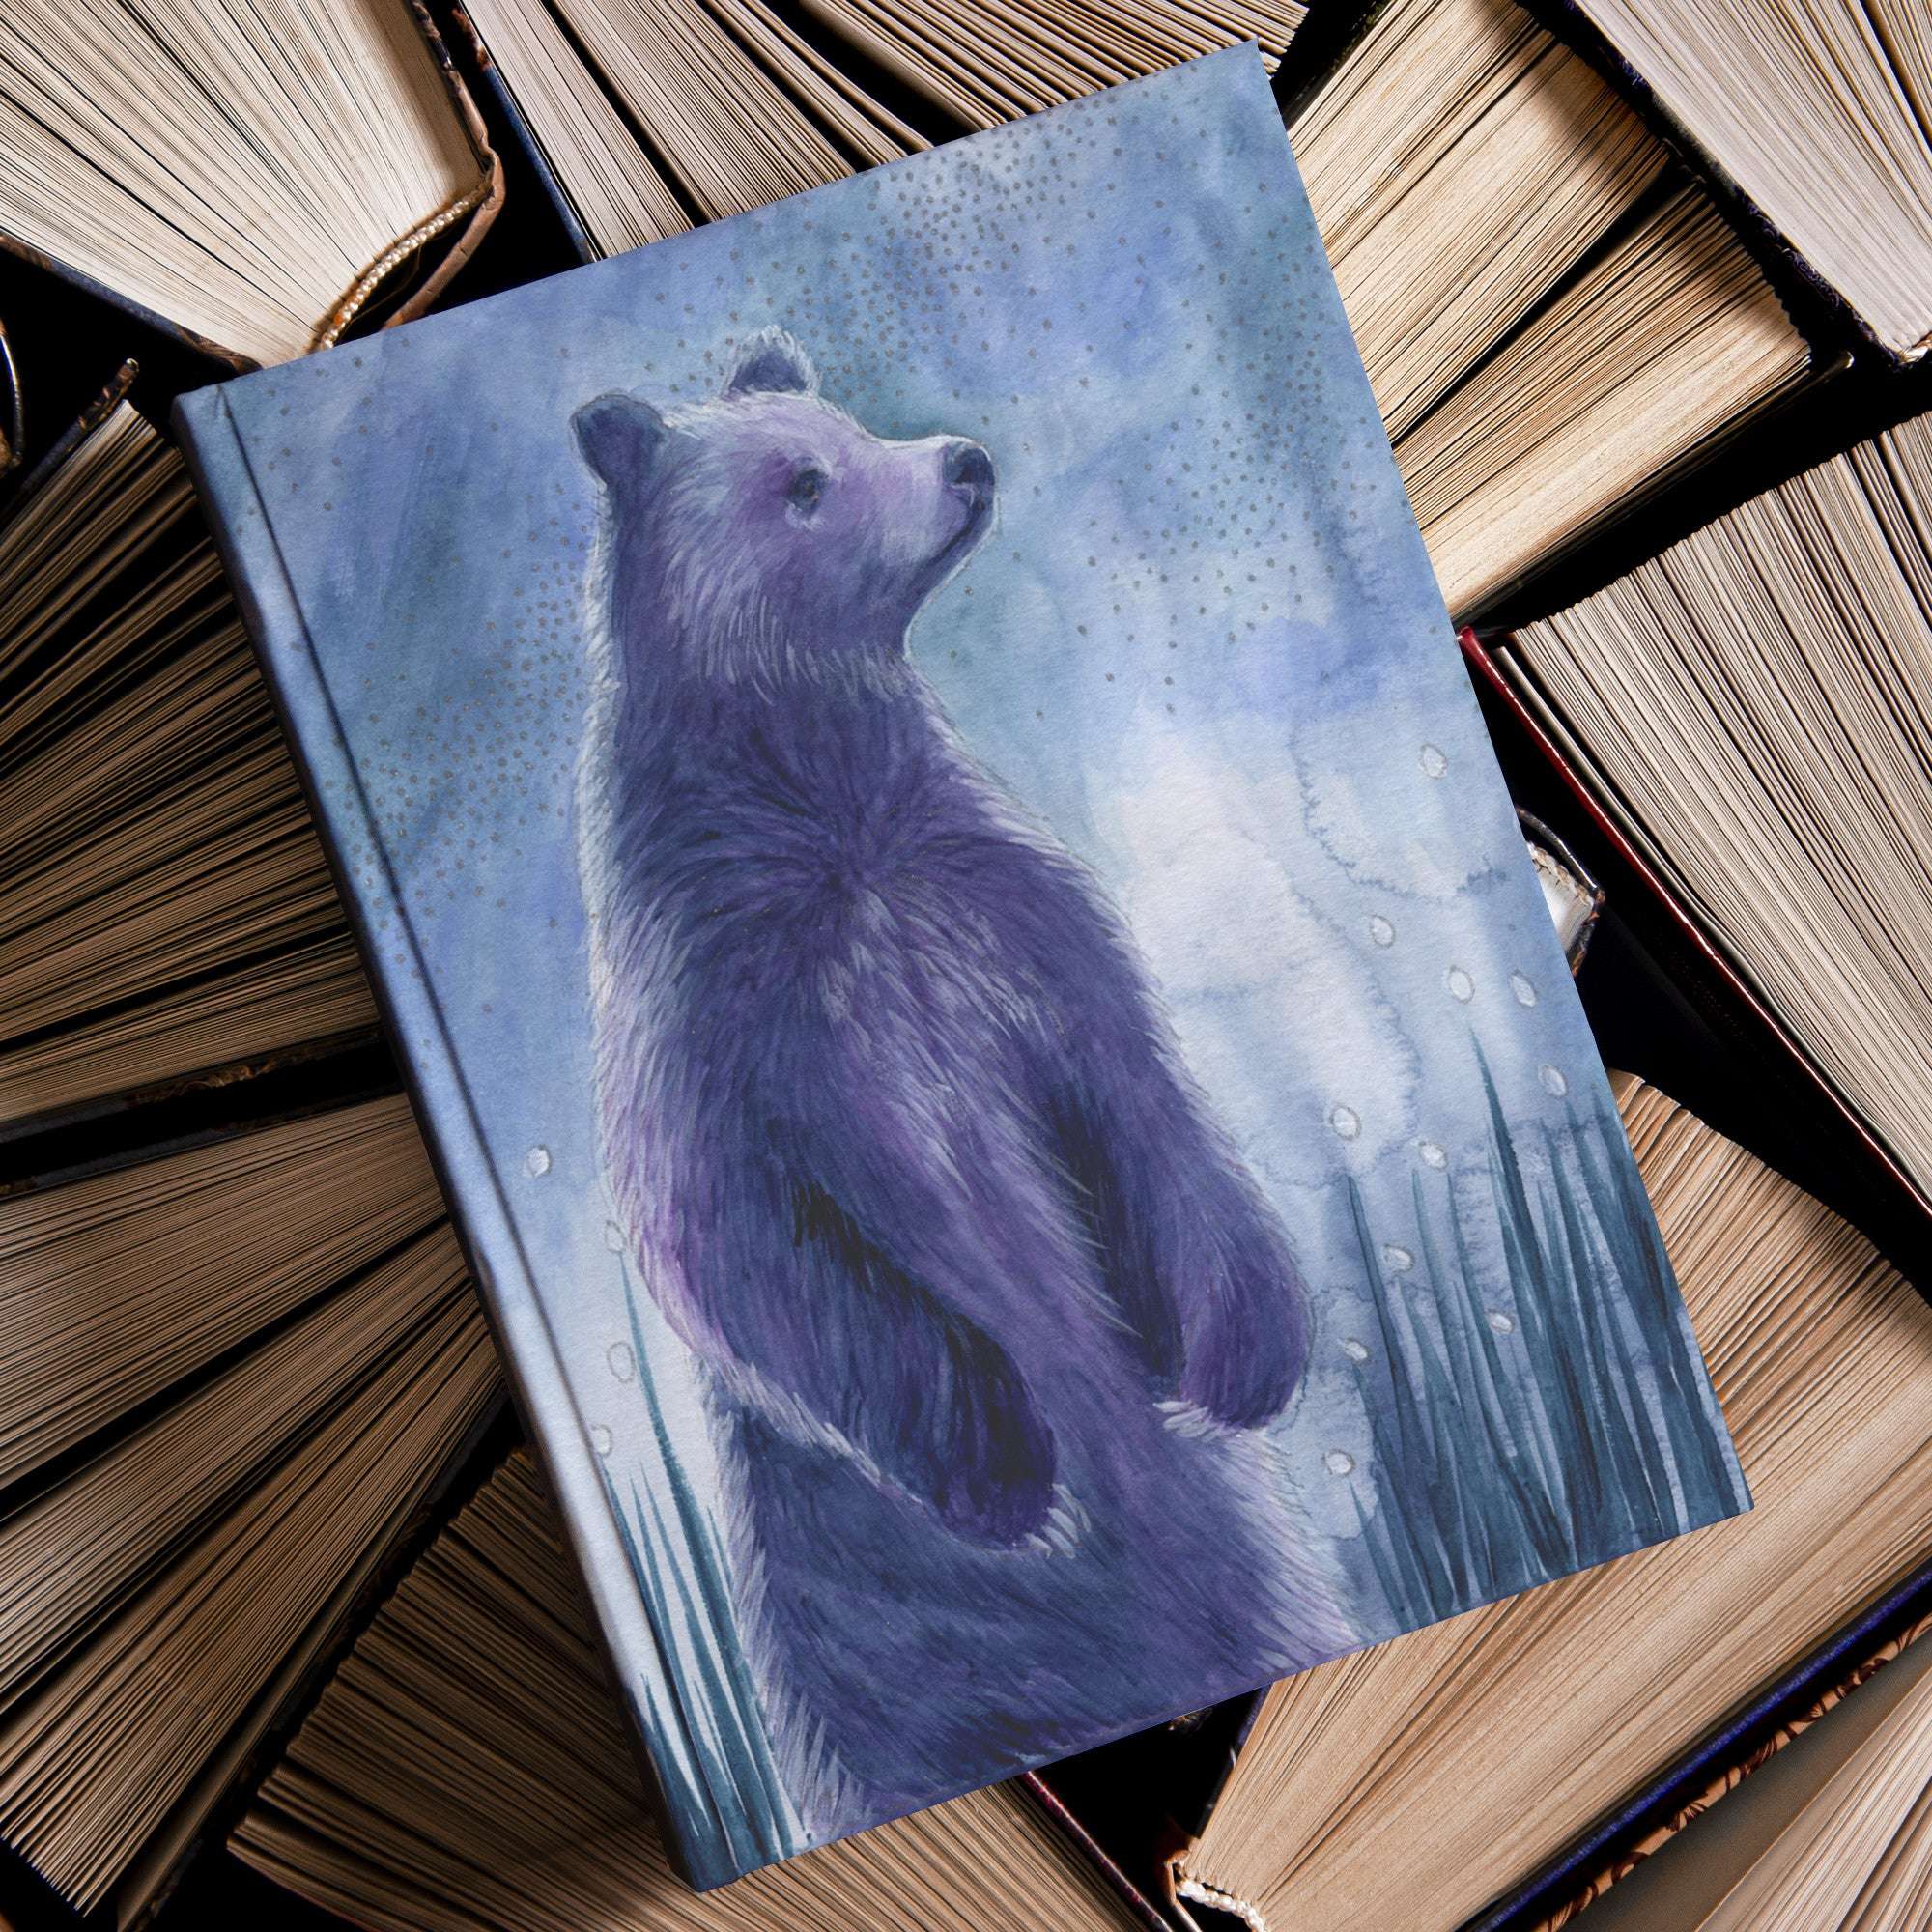 A watercolor painting of a purple bear on the Celestial Bear Journal cover, surrounded by stacks of old books.